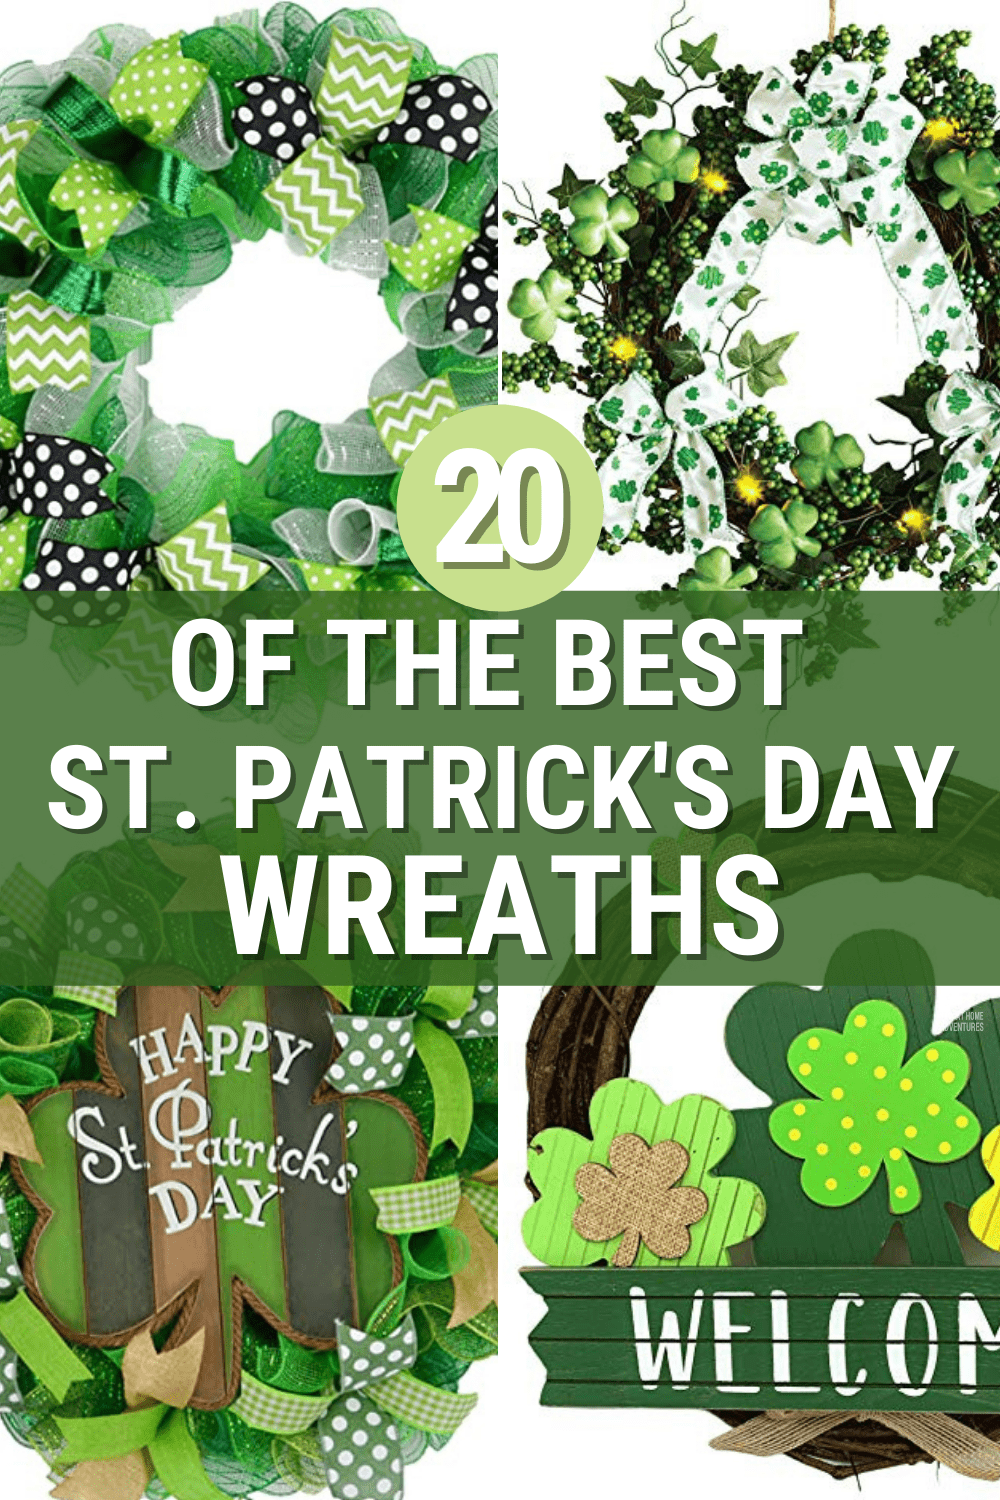 If you're looking for some ideas or inspirations for your St Patrick's Day wreath. We've gathered up 20 of the best from around the web. via @mystayathome